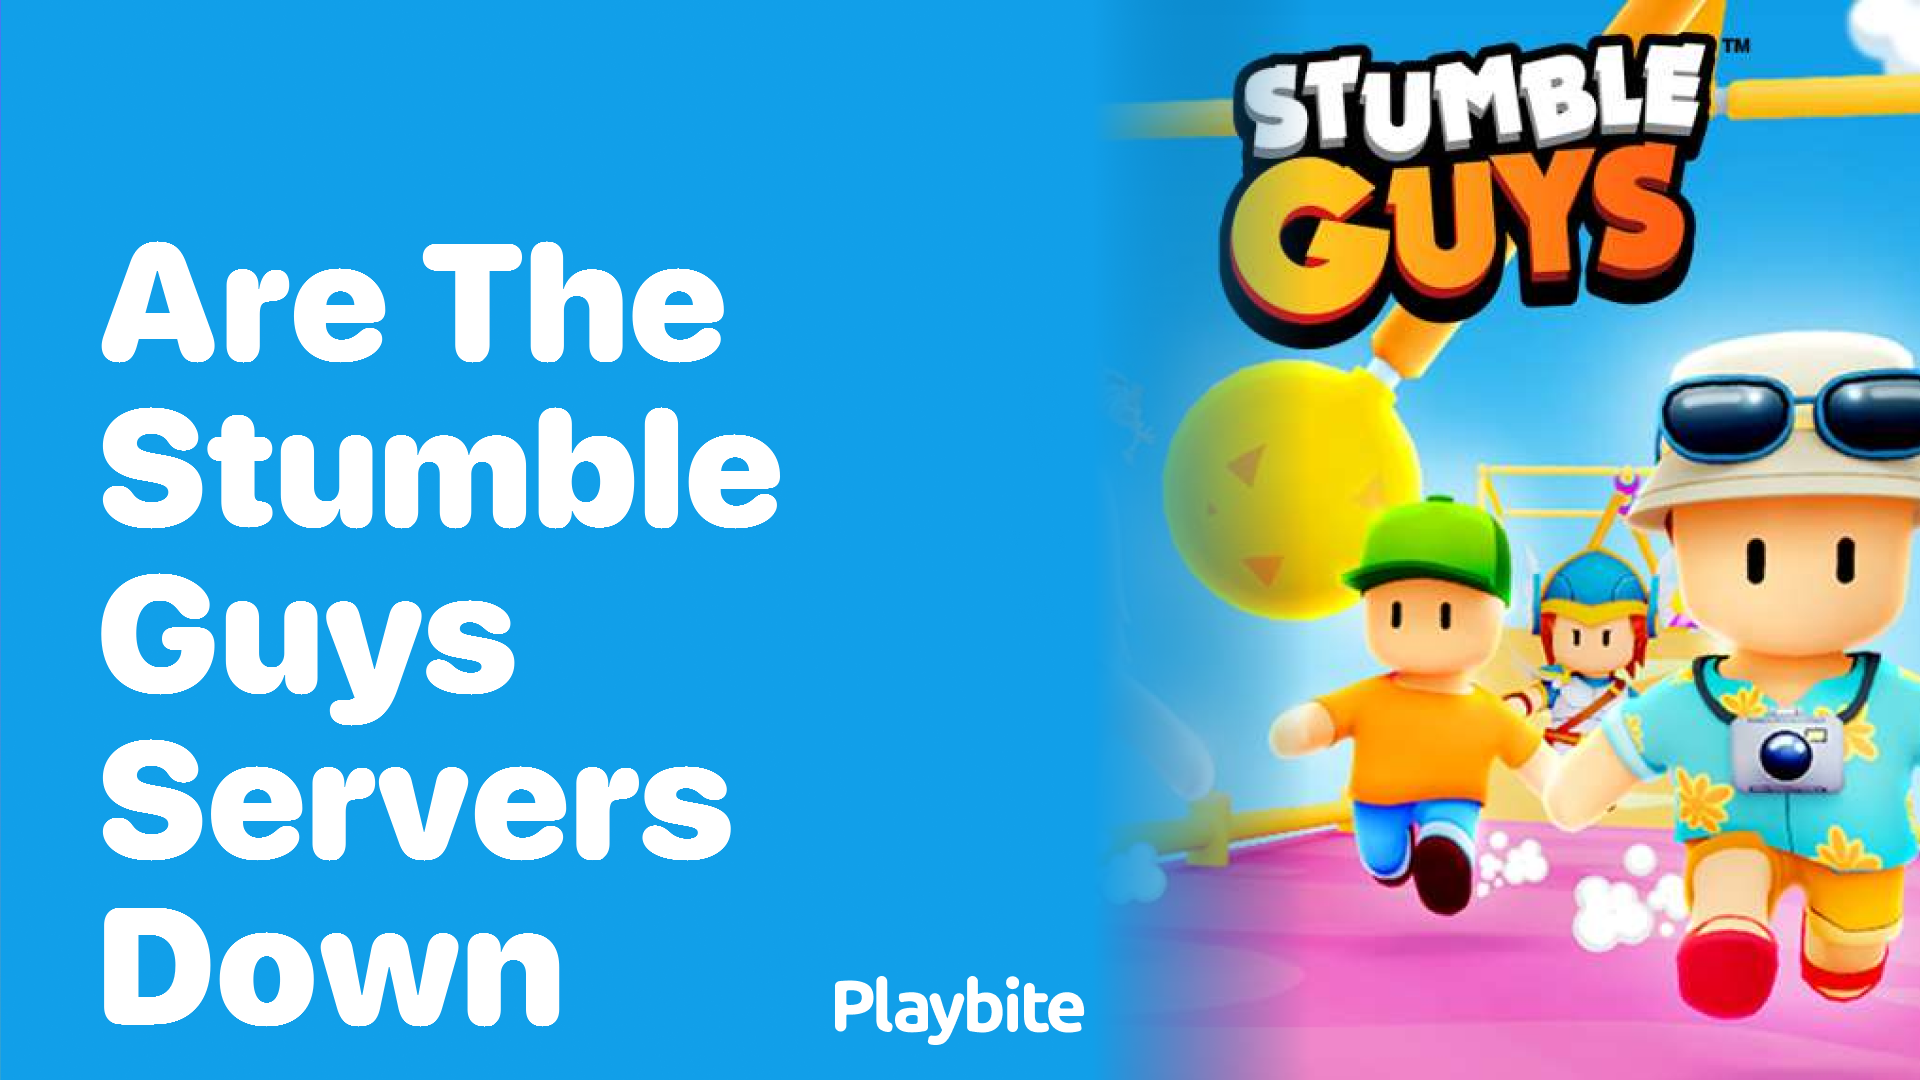 Are the Stumble Guys Servers Down? Find Out Now!